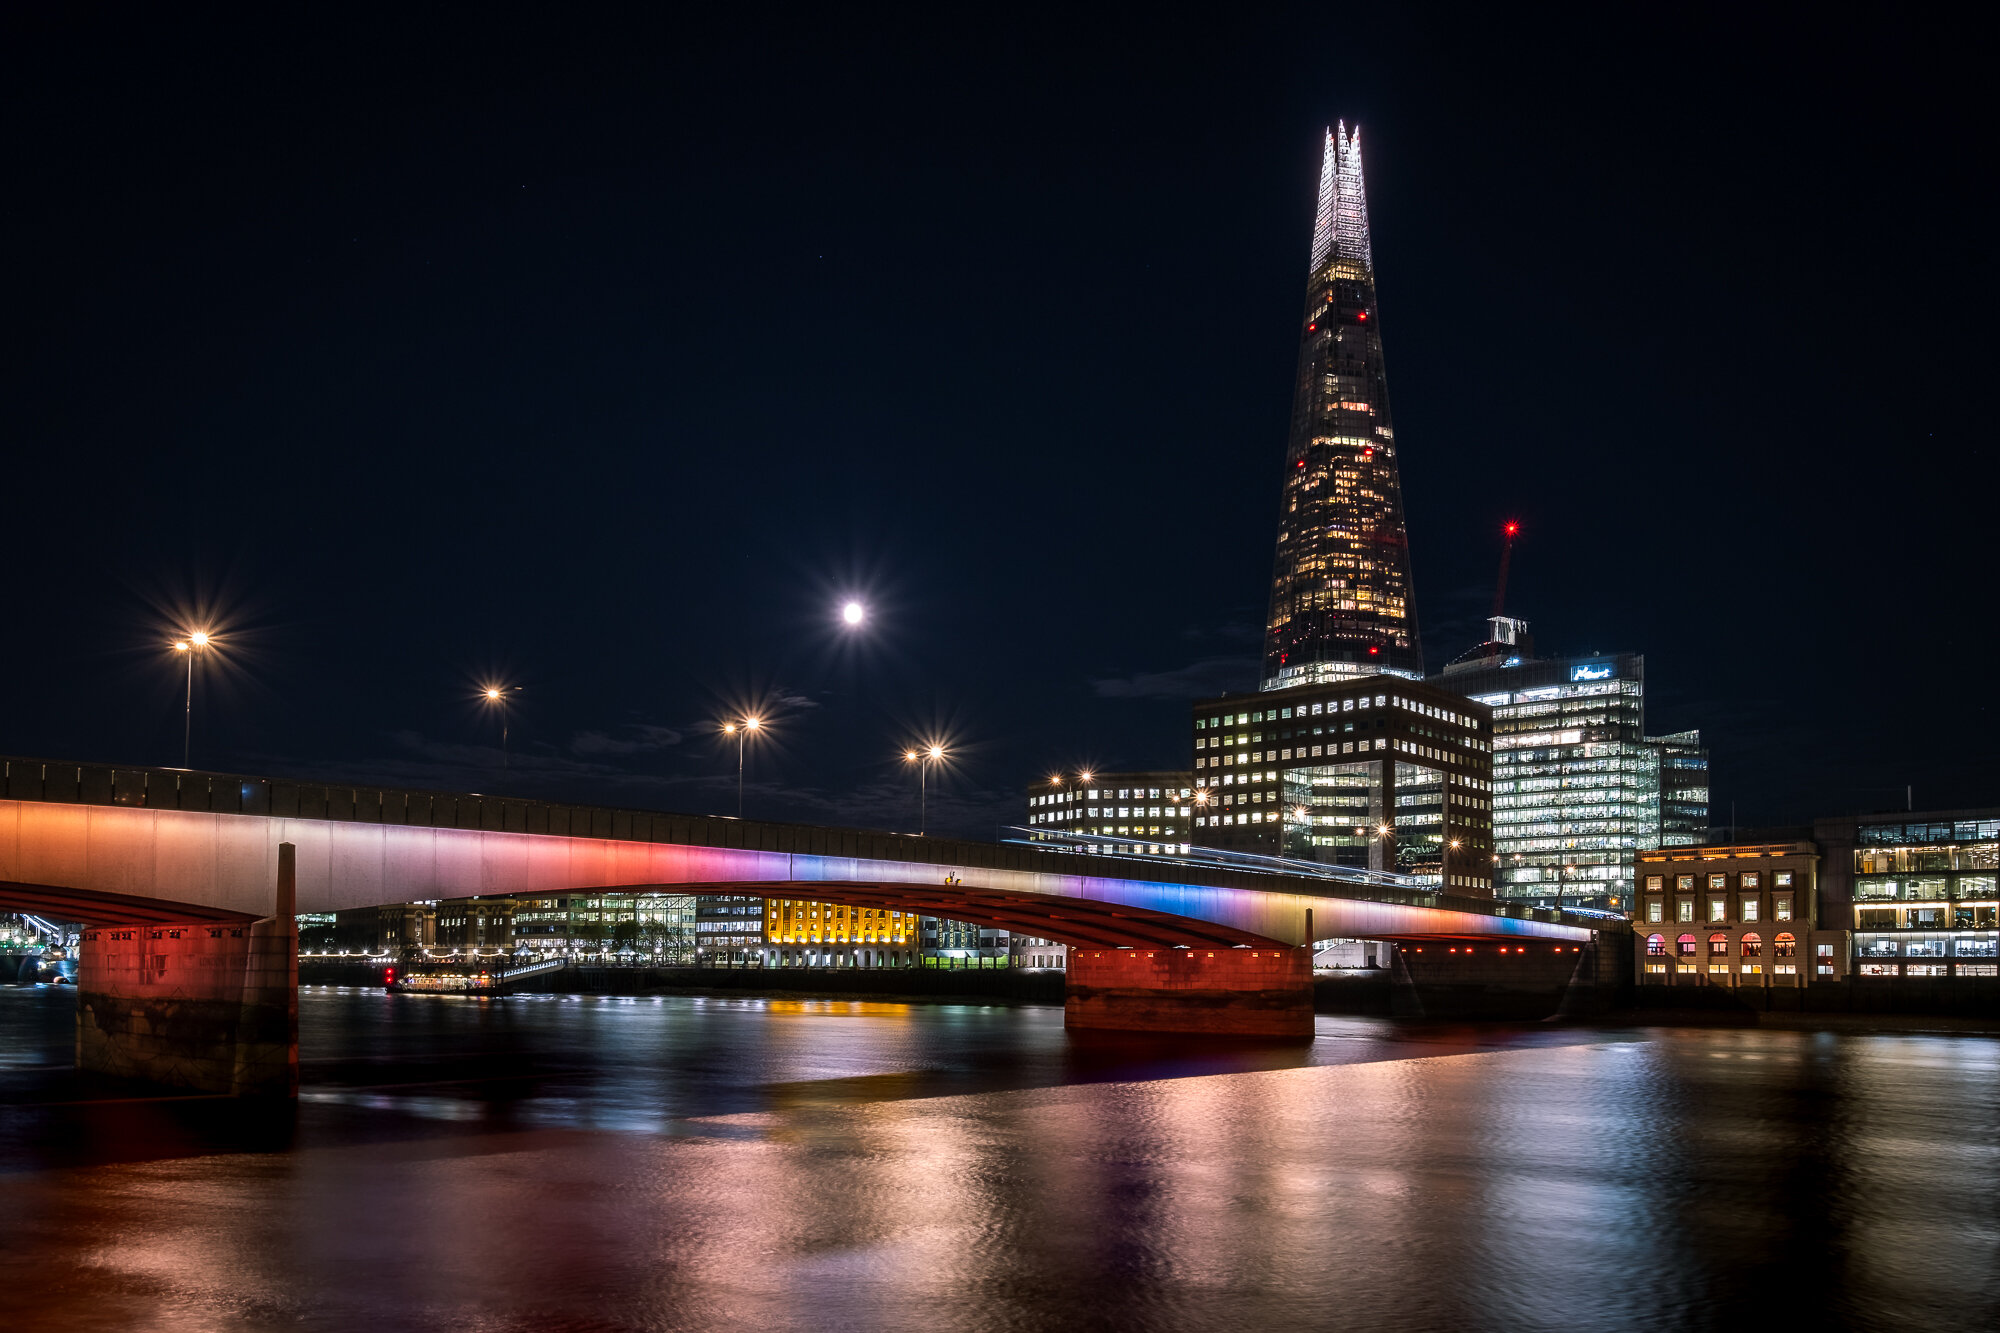 My Top 10 Night Photography Spots in London | Trevor Sherwin Photography